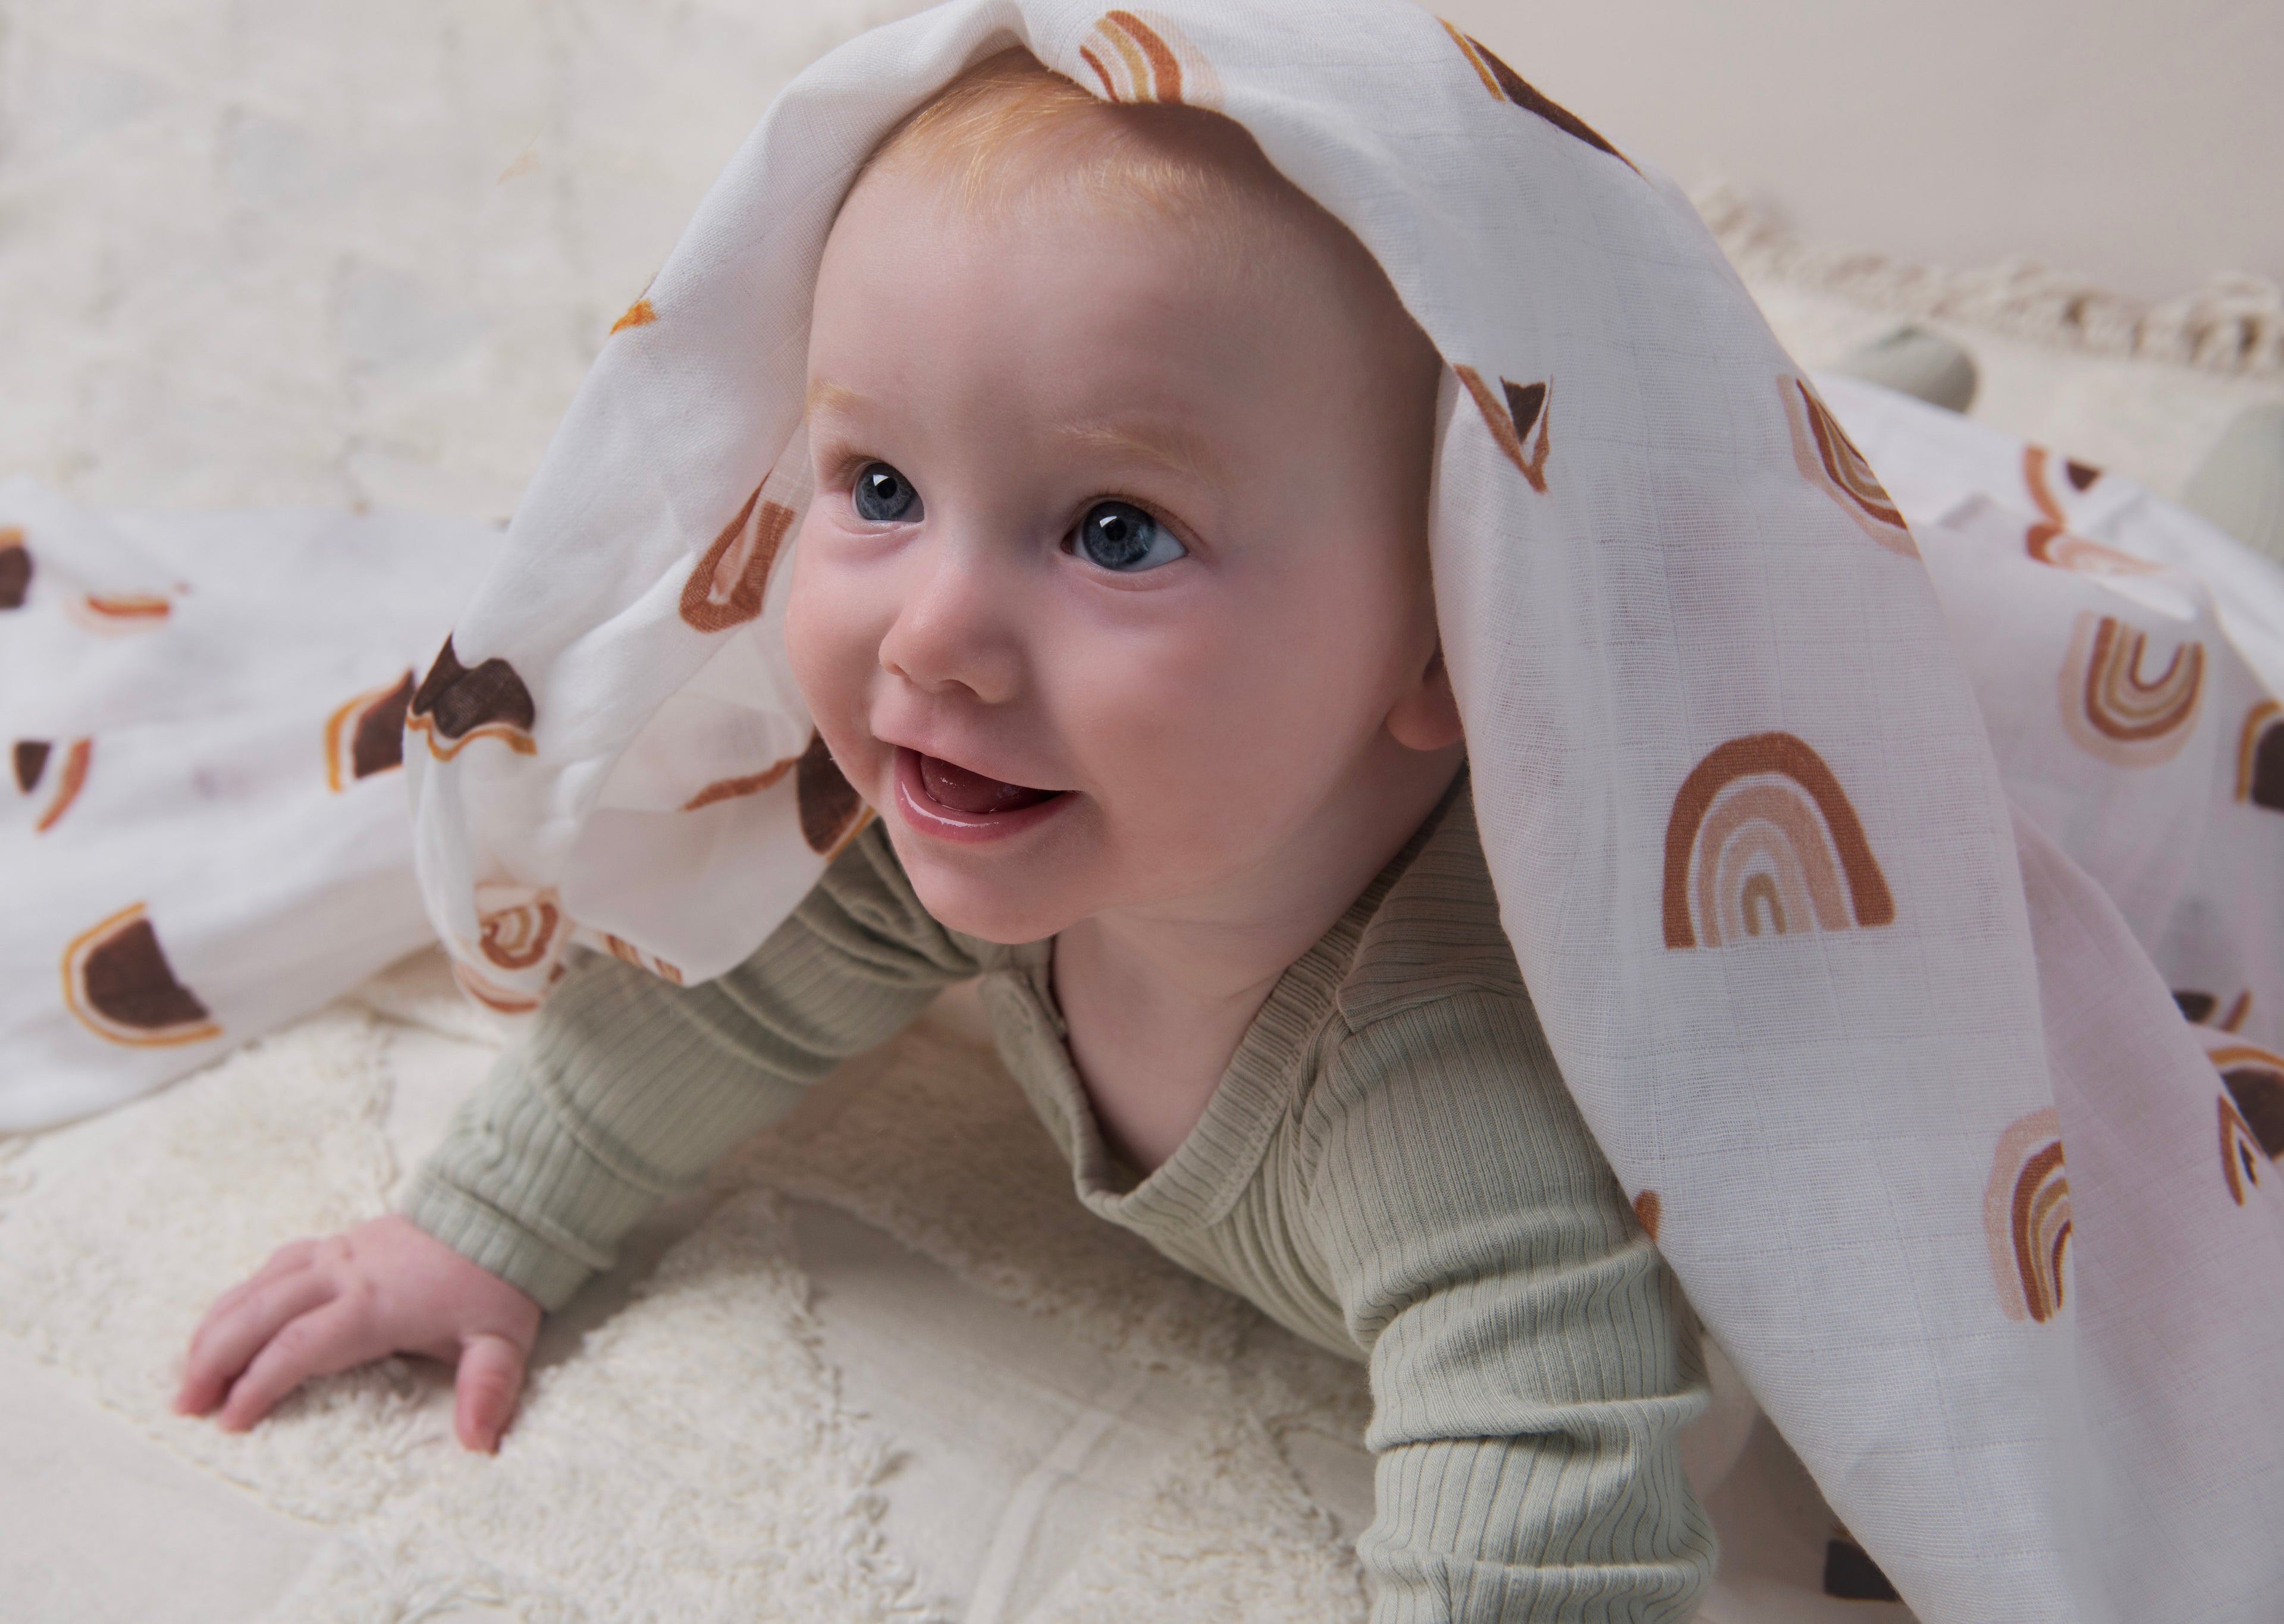 Discover the charm of Little Cotton Bear's organic cotton collection - where every detail is crafted with love. Gentle on delicate skin, our ribbed organic cotton outfits keep your little bear snug and stylish.